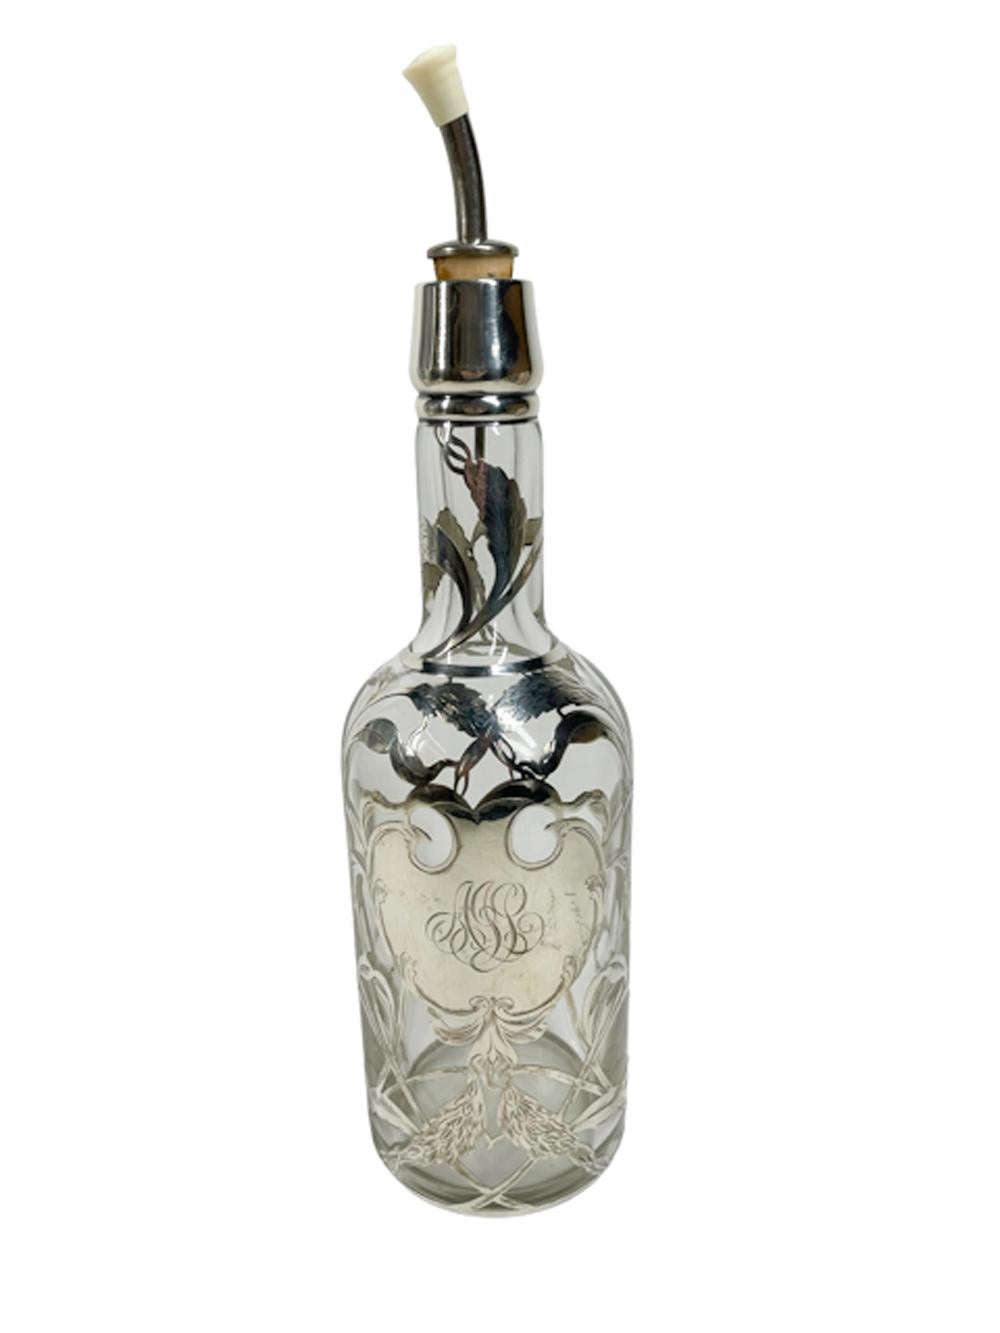 American silver overlay back bar bottle or decanter having an overlaid design of wheat heads around a monogramed cartouche in sterling. The wheat design representing whiskey or rye. Back bar bottles were popular from the end of the 19th century into